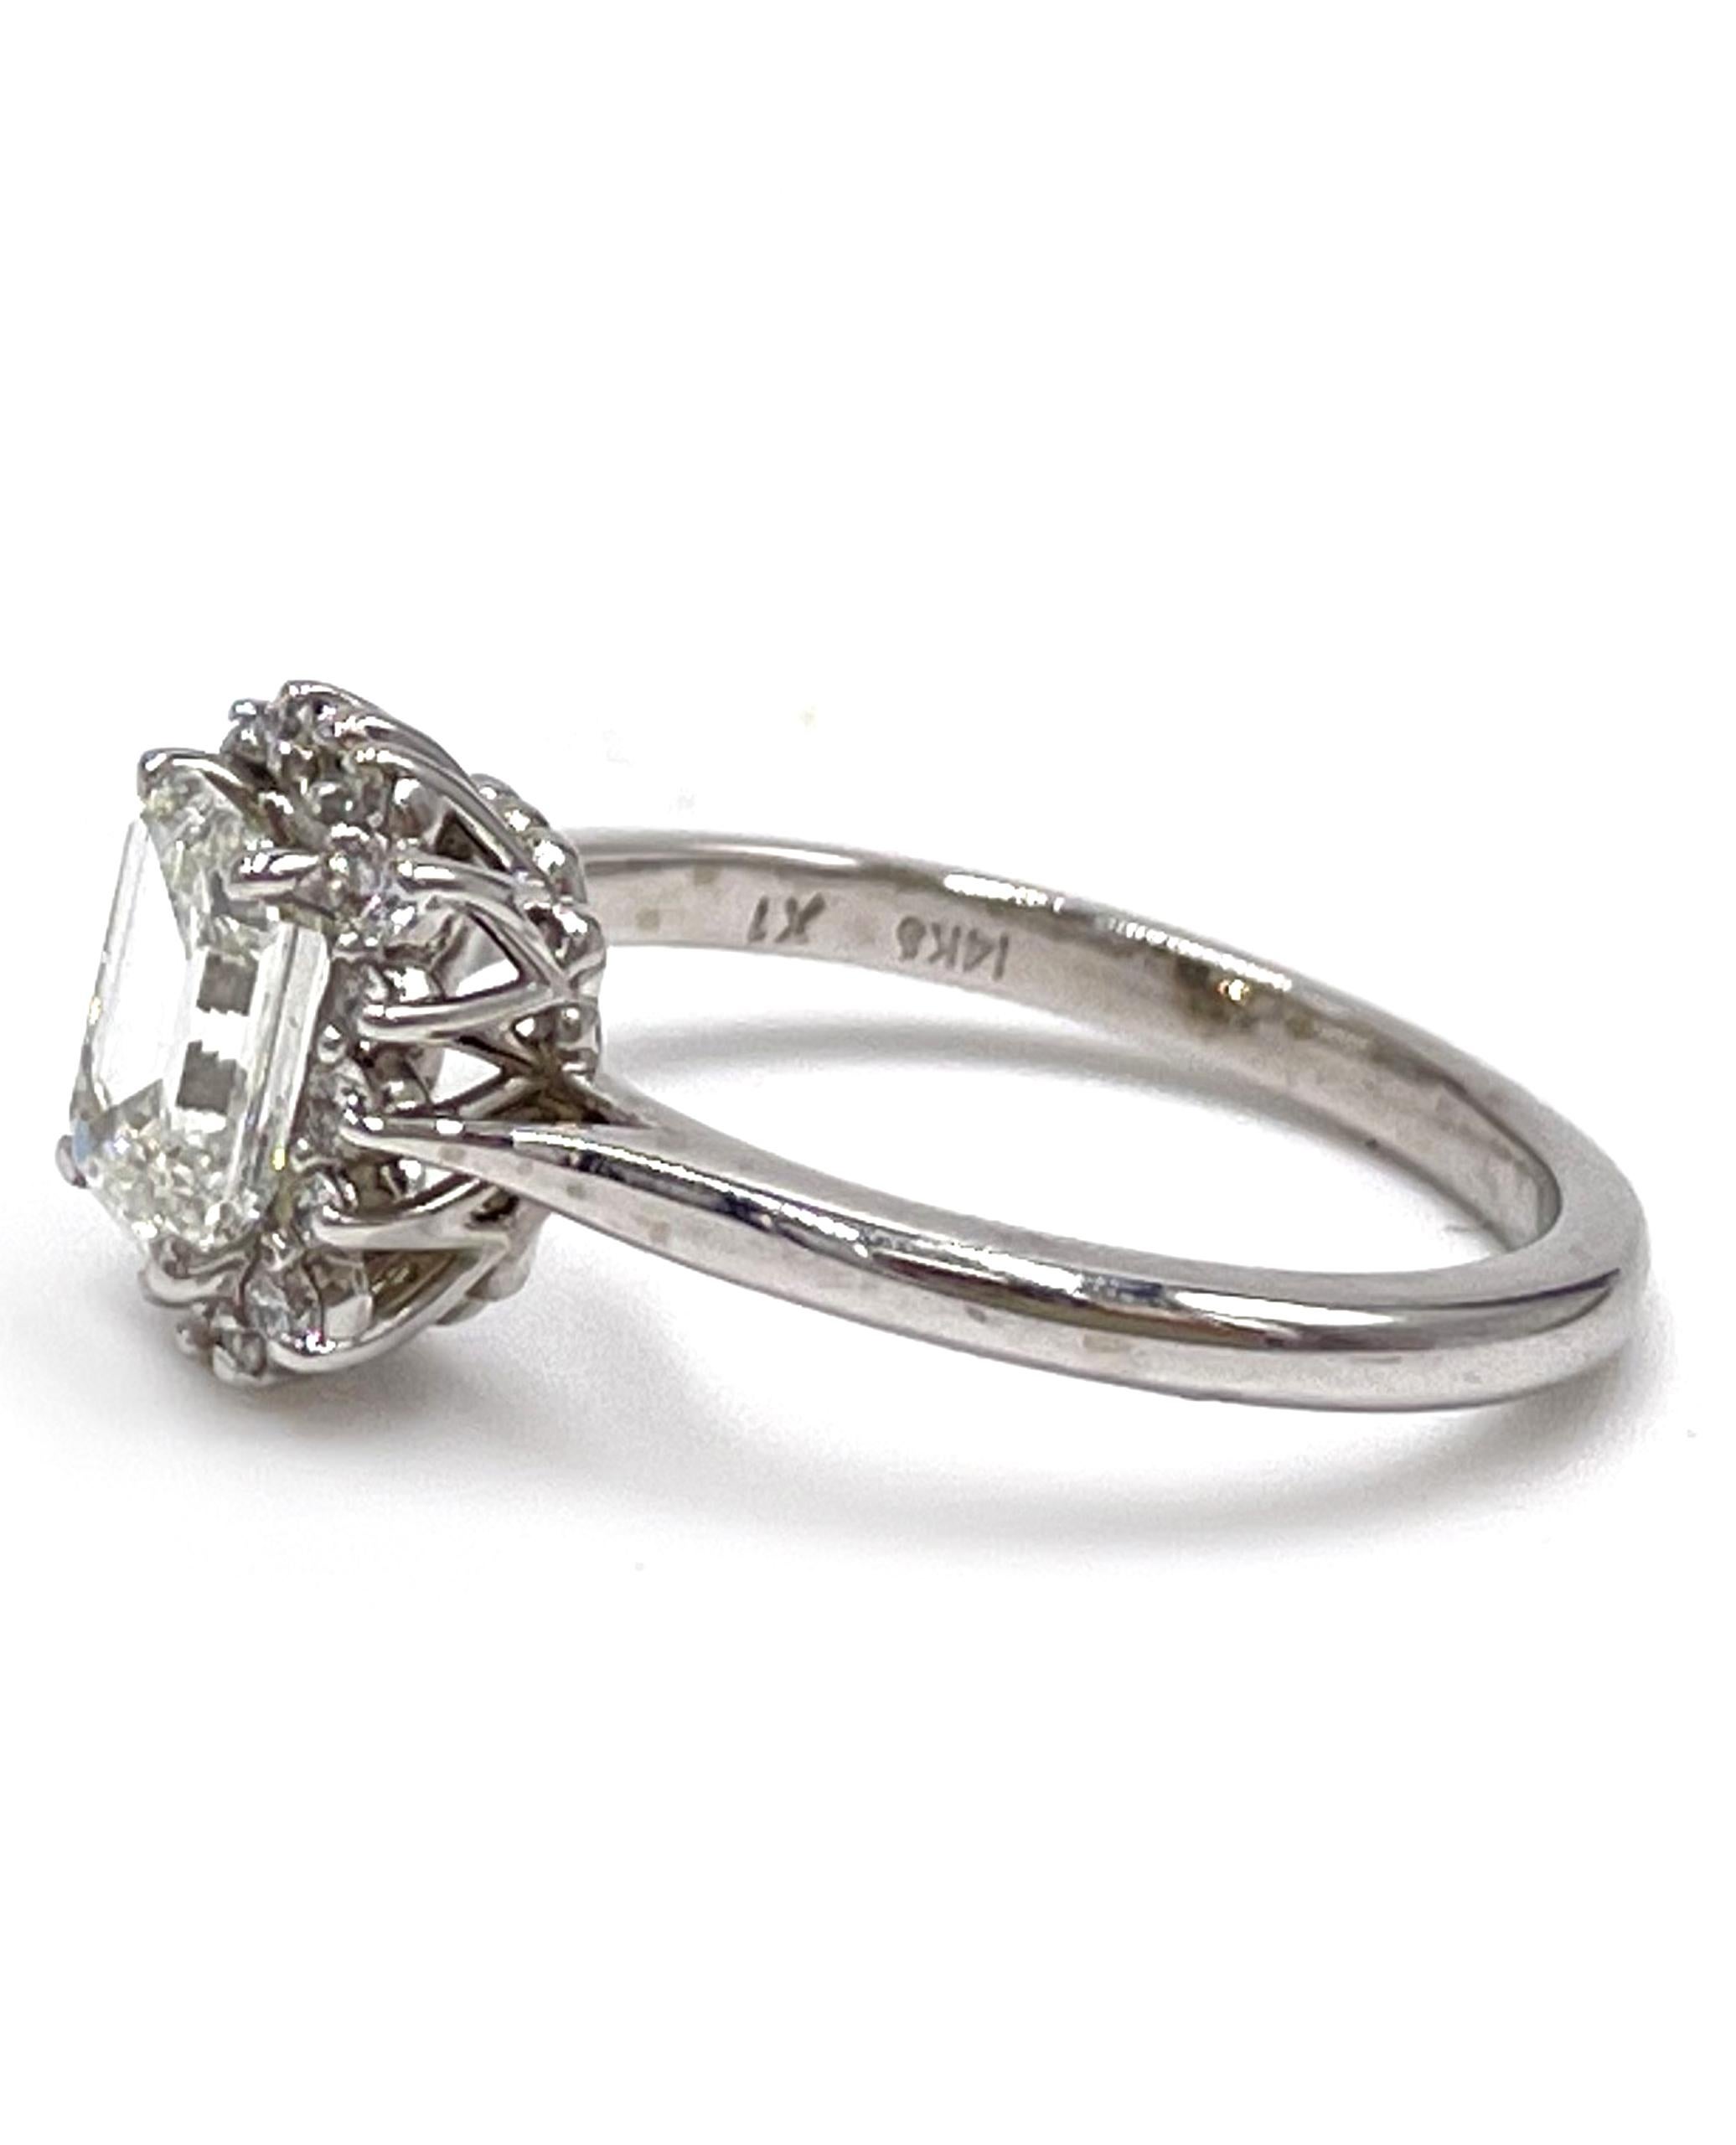 14K white gold halo engagement ring furnished with 16 round faceted diamonds 0.18 carats total weight. In the center there is one emerald cut diamond weighing 1.13 carats (H color, VVS2 clarity).

* Center emerald cut diamond is GIA certified
*